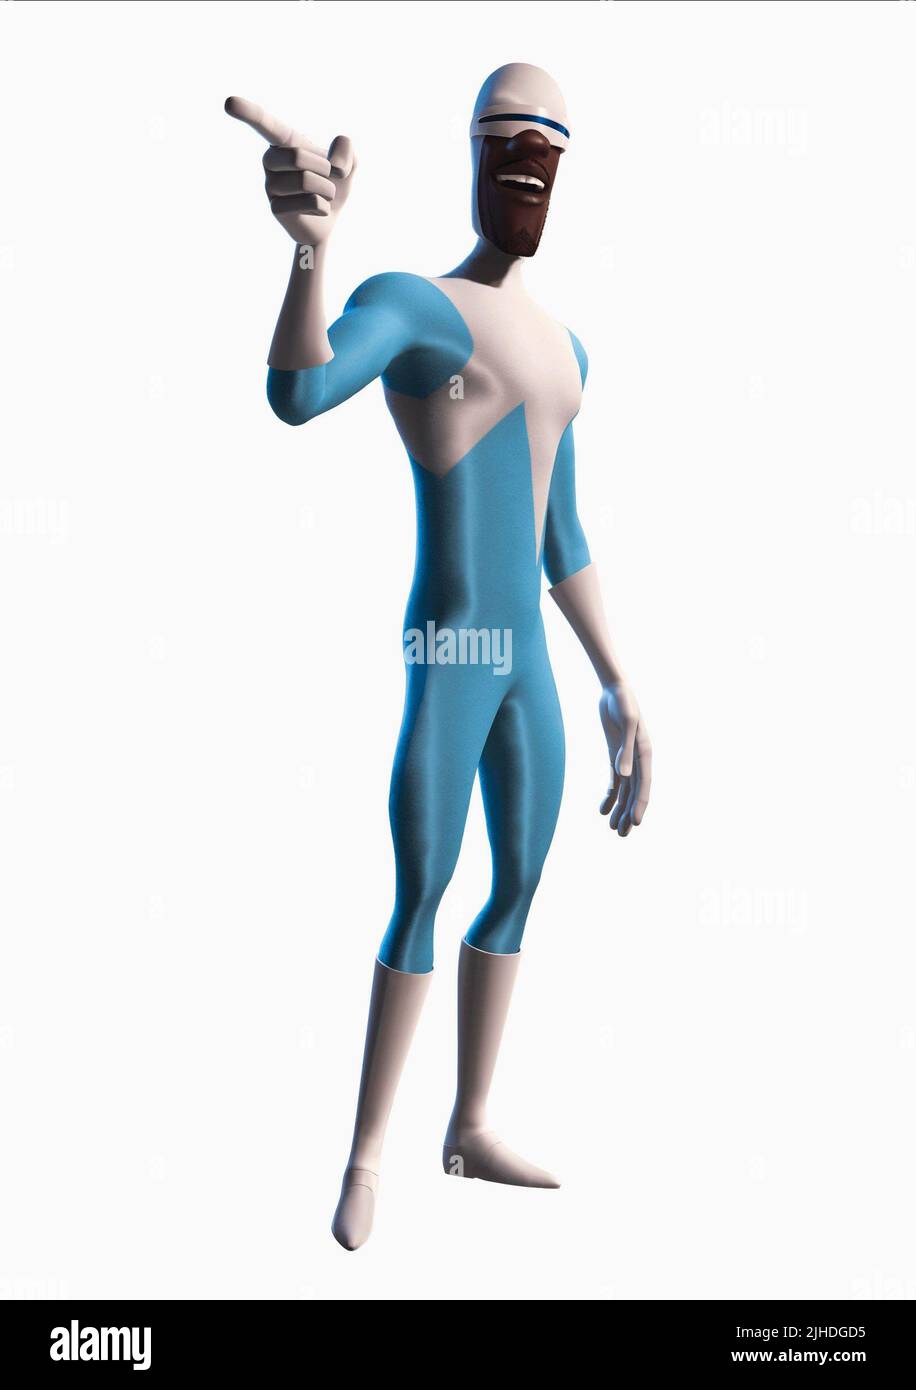 FROZONE AKA LUCIUS BEST, THE INCREDIBLES, 2004 Stock Photo